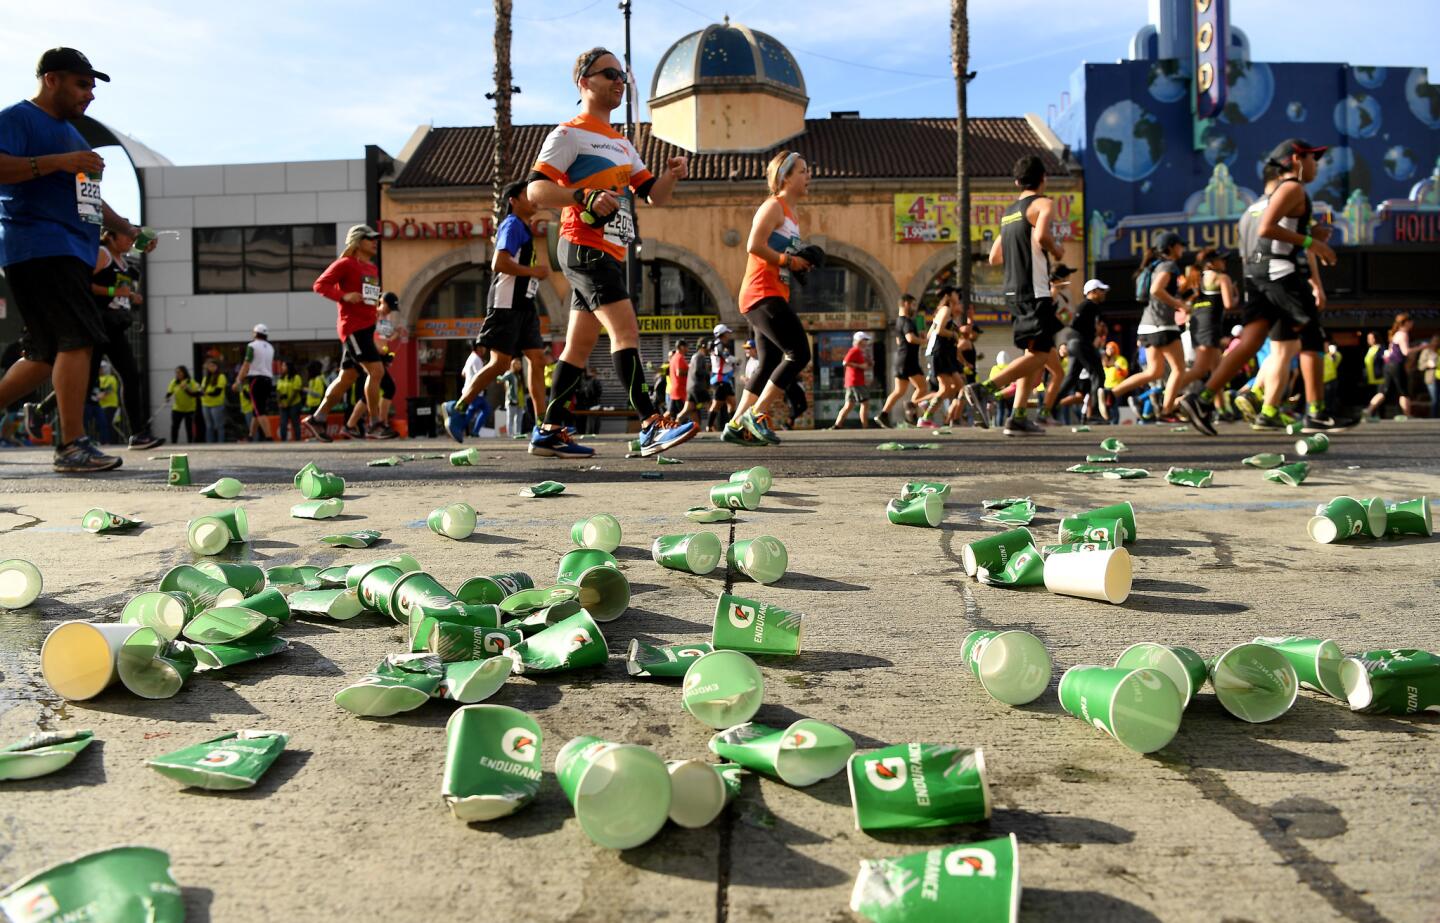 Discarded water cups along Hollywood Blvd. during the L.A. Marathon.